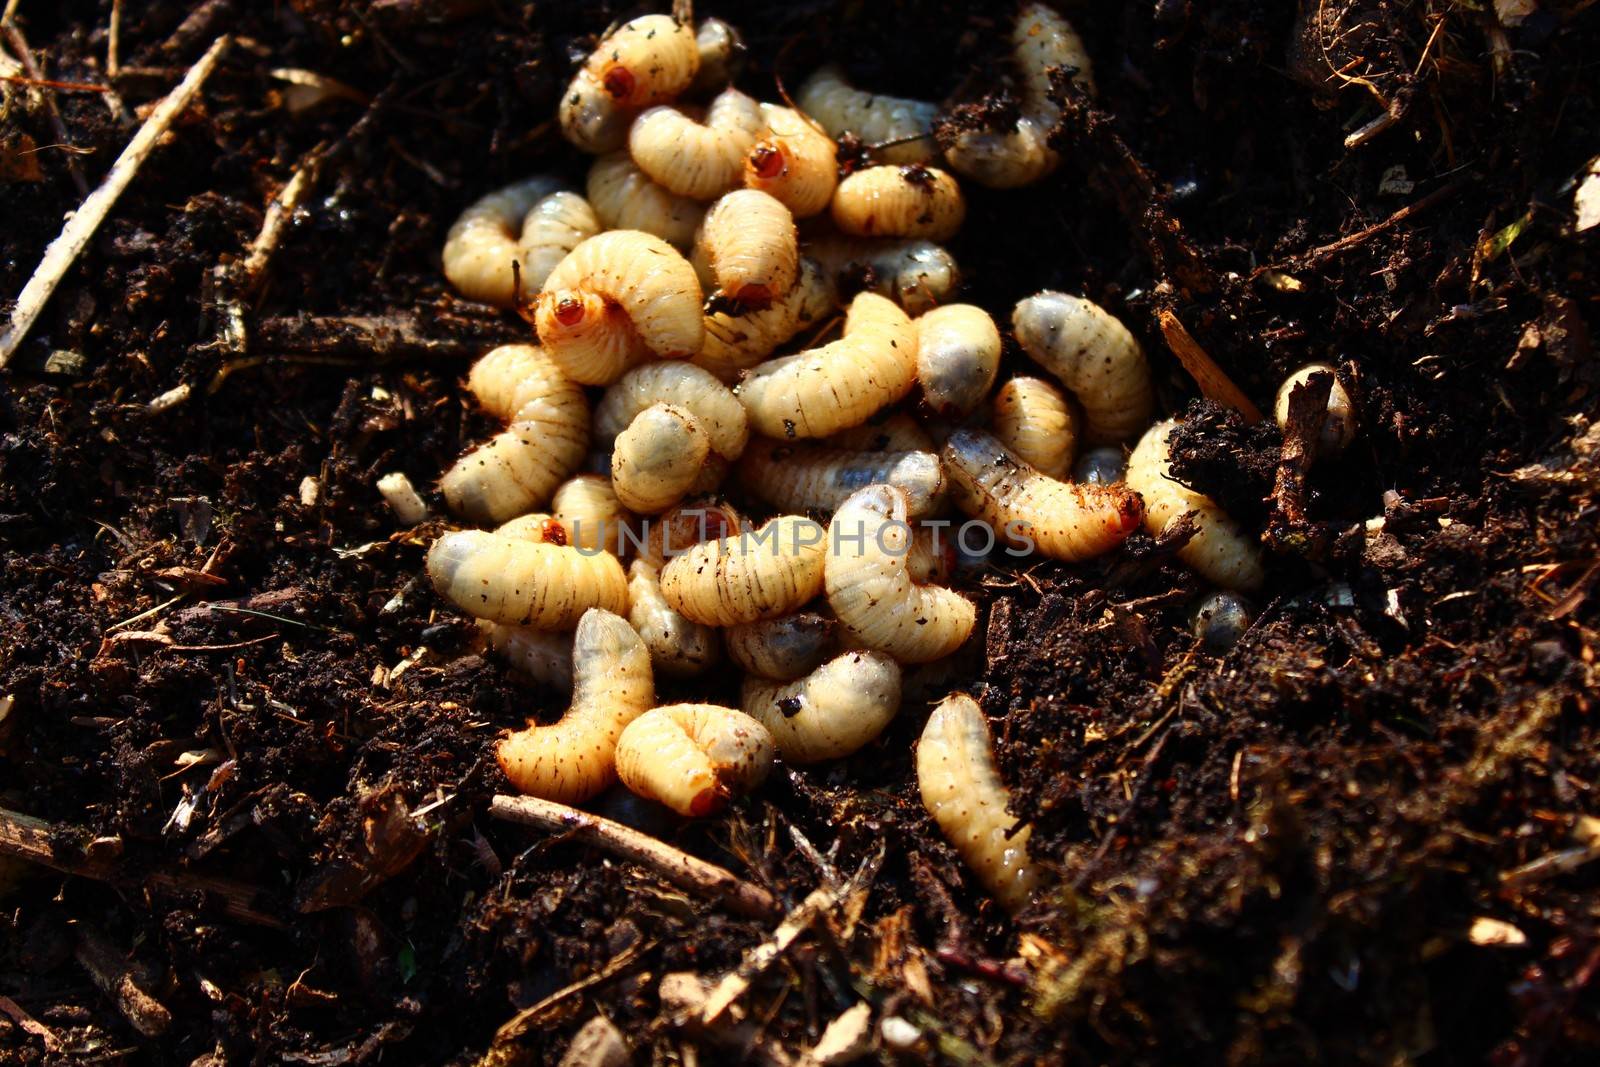 rose chafer larvae in the compost pile by martina_unbehauen